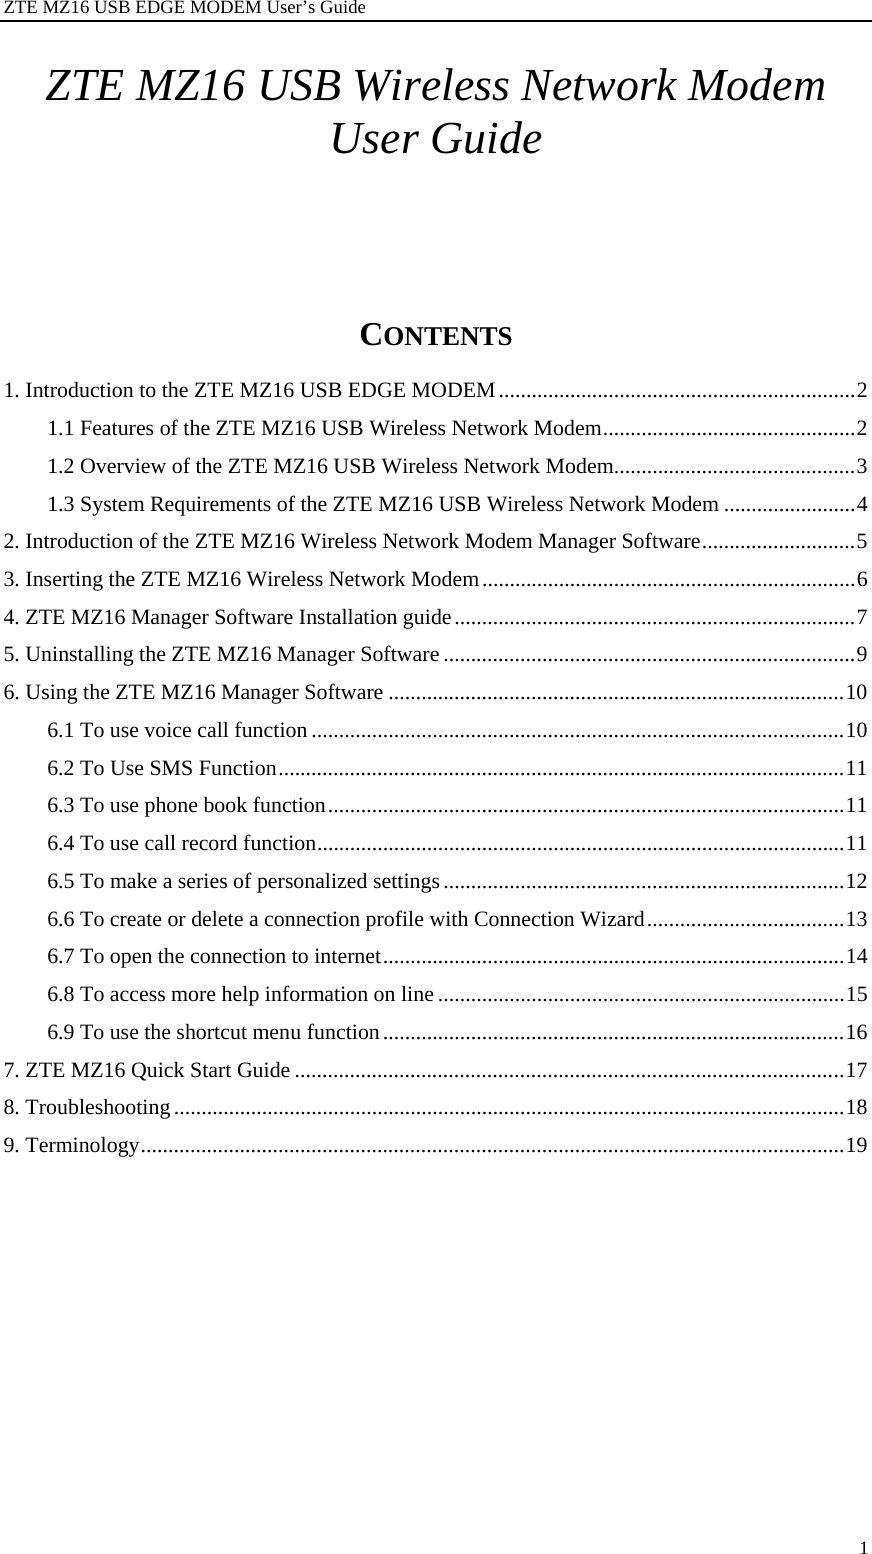 ZTE MZ16 USB EDGE MODEM User’s Guide 1 ZTE MZ16 USB Wireless Network Modem User Guide          CONTENTS   1. Introduction to the ZTE MZ16 USB EDGE MODEM.................................................................2 1.1 Features of the ZTE MZ16 USB Wireless Network Modem..............................................2 1.2 Overview of the ZTE MZ16 USB Wireless Network Modem............................................3 1.3 System Requirements of the ZTE MZ16 USB Wireless Network Modem ........................4 2. Introduction of the ZTE MZ16 Wireless Network Modem Manager Software............................5 3. Inserting the ZTE MZ16 Wireless Network Modem....................................................................6 4. ZTE MZ16 Manager Software Installation guide.........................................................................7 5. Uninstalling the ZTE MZ16 Manager Software ...........................................................................9 6. Using the ZTE MZ16 Manager Software ...................................................................................10 6.1 To use voice call function .................................................................................................10 6.2 To Use SMS Function.......................................................................................................11 6.3 To use phone book function..............................................................................................11 6.4 To use call record function................................................................................................11 6.5 To make a series of personalized settings.........................................................................12 6.6 To create or delete a connection profile with Connection Wizard....................................13 6.7 To open the connection to internet....................................................................................14 6.8 To access more help information on line ..........................................................................15 6.9 To use the shortcut menu function....................................................................................16 7. ZTE MZ16 Quick Start Guide ....................................................................................................17 8. Troubleshooting ..........................................................................................................................18 9. Terminology................................................................................................................................19 